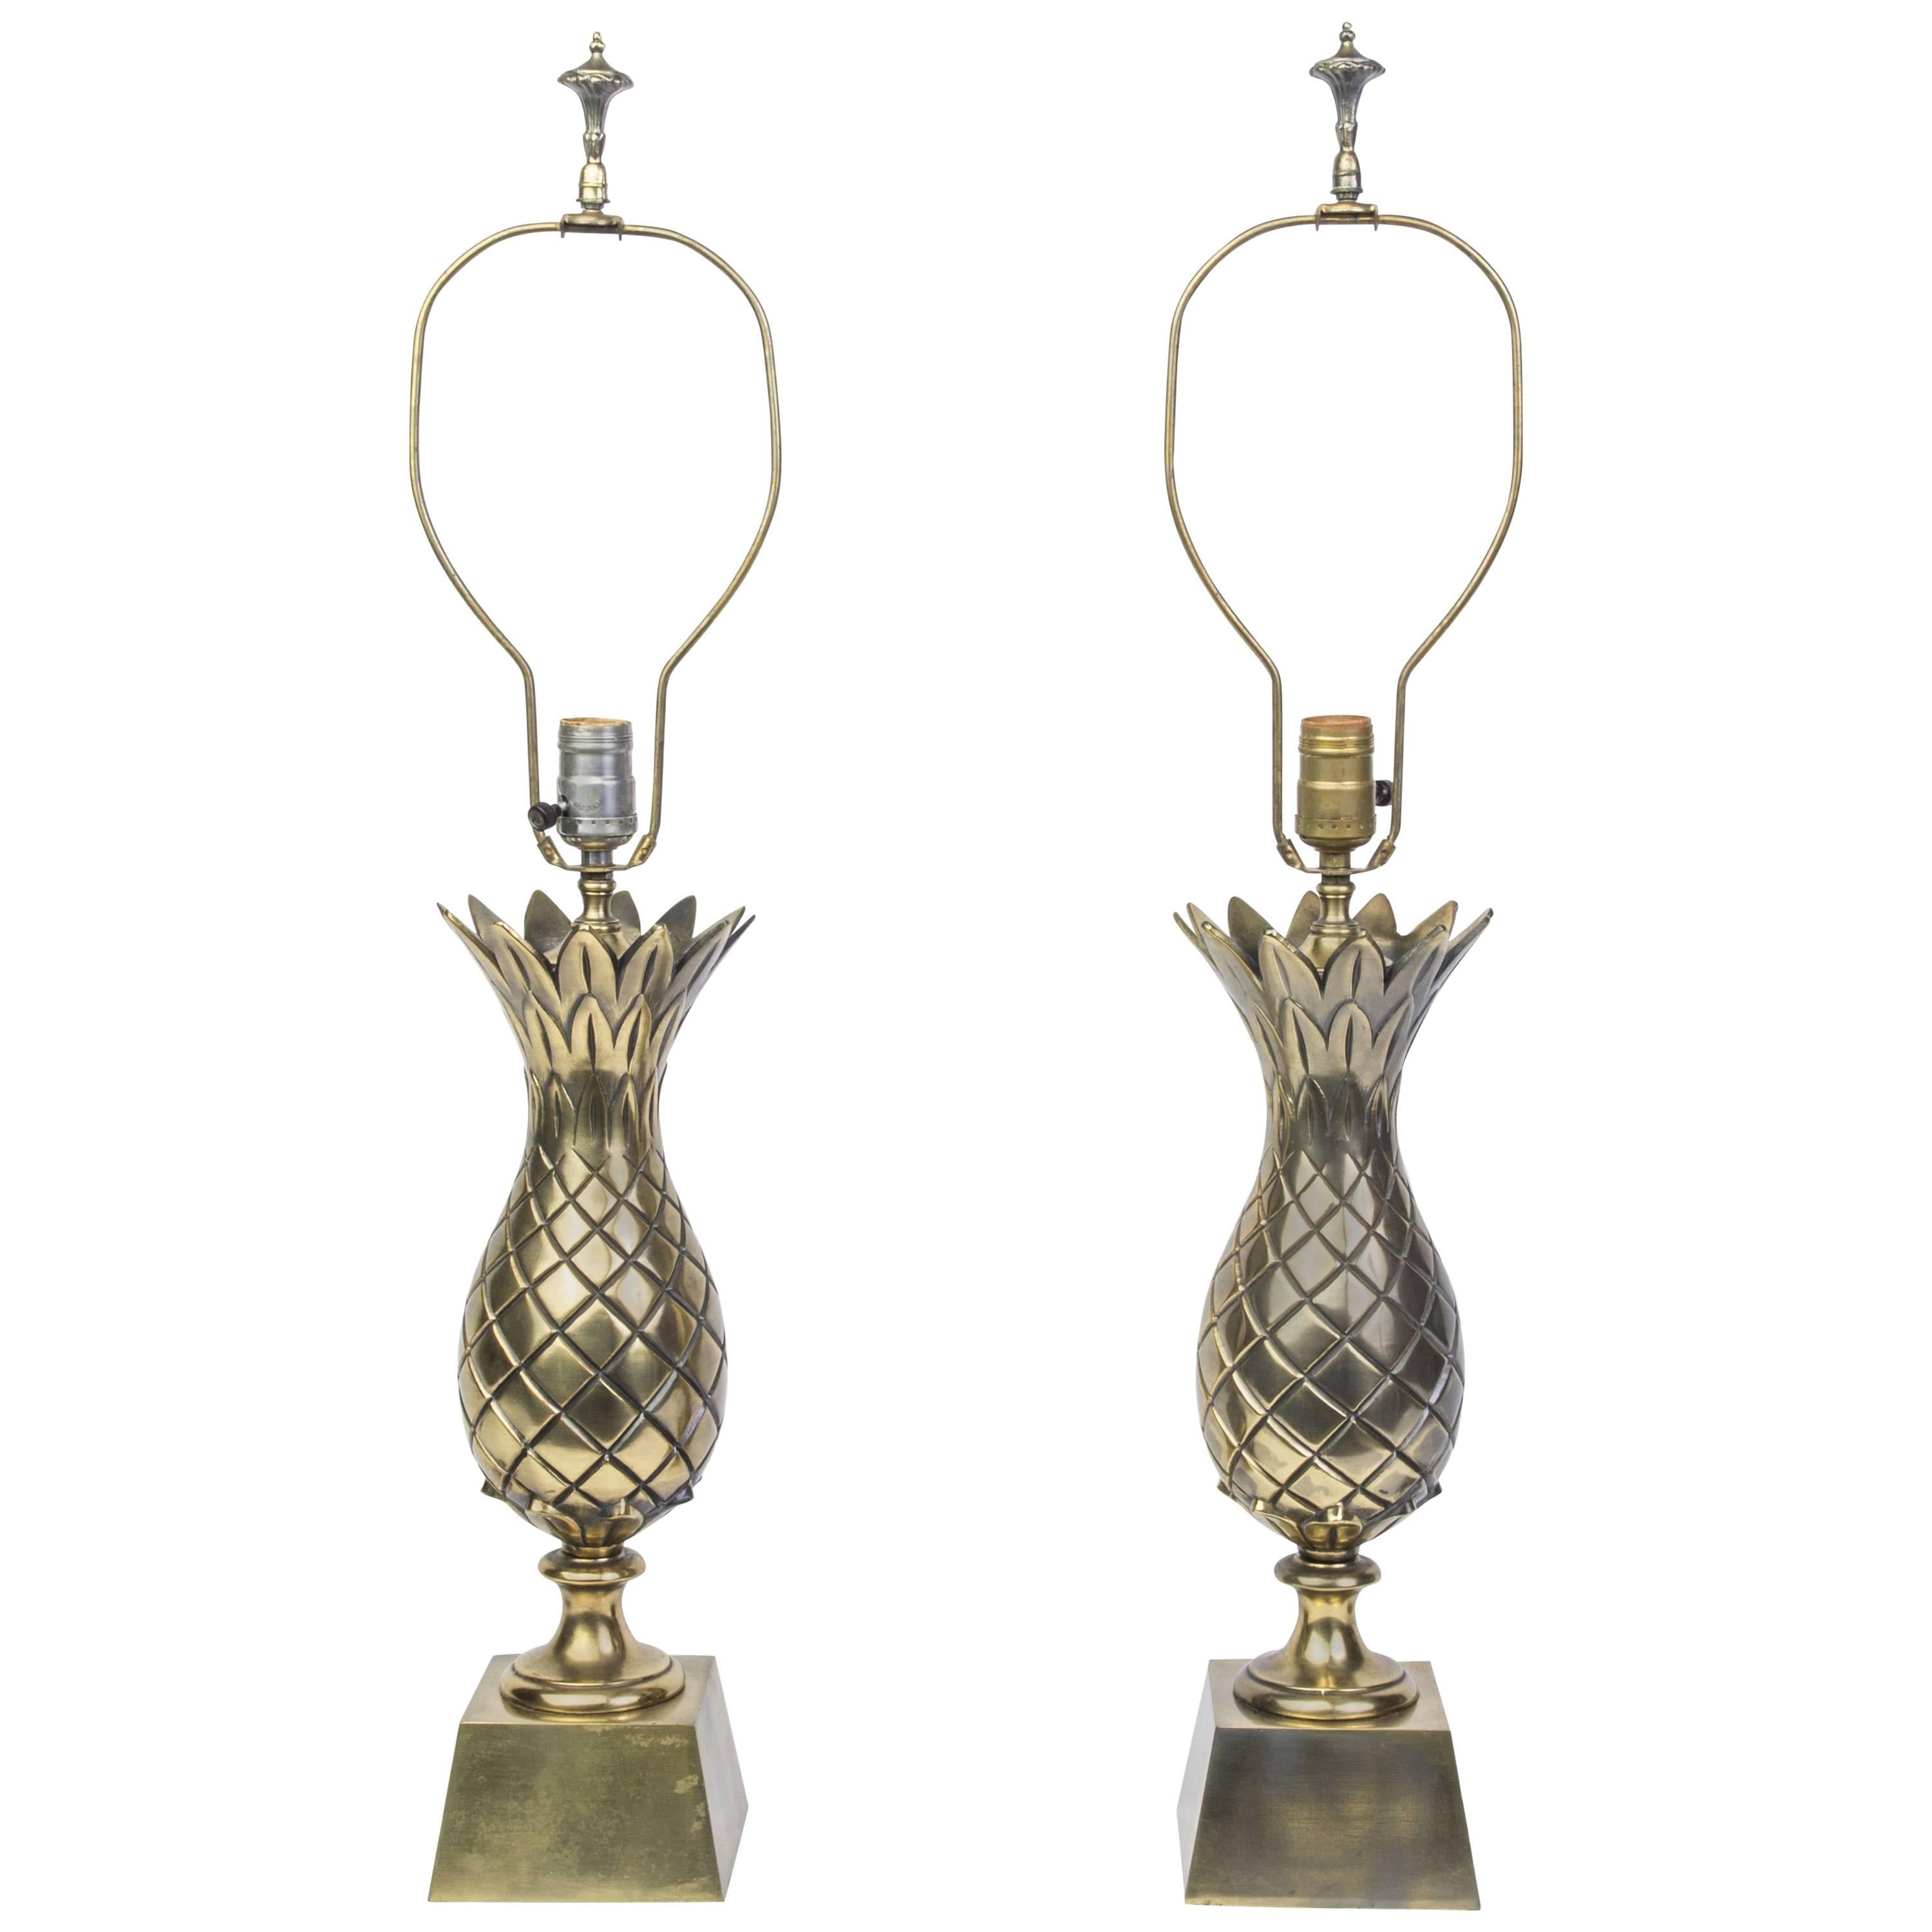 Captivating Pair of Mid-Century Modernist Brass Pineapple Table Lamps For Sale